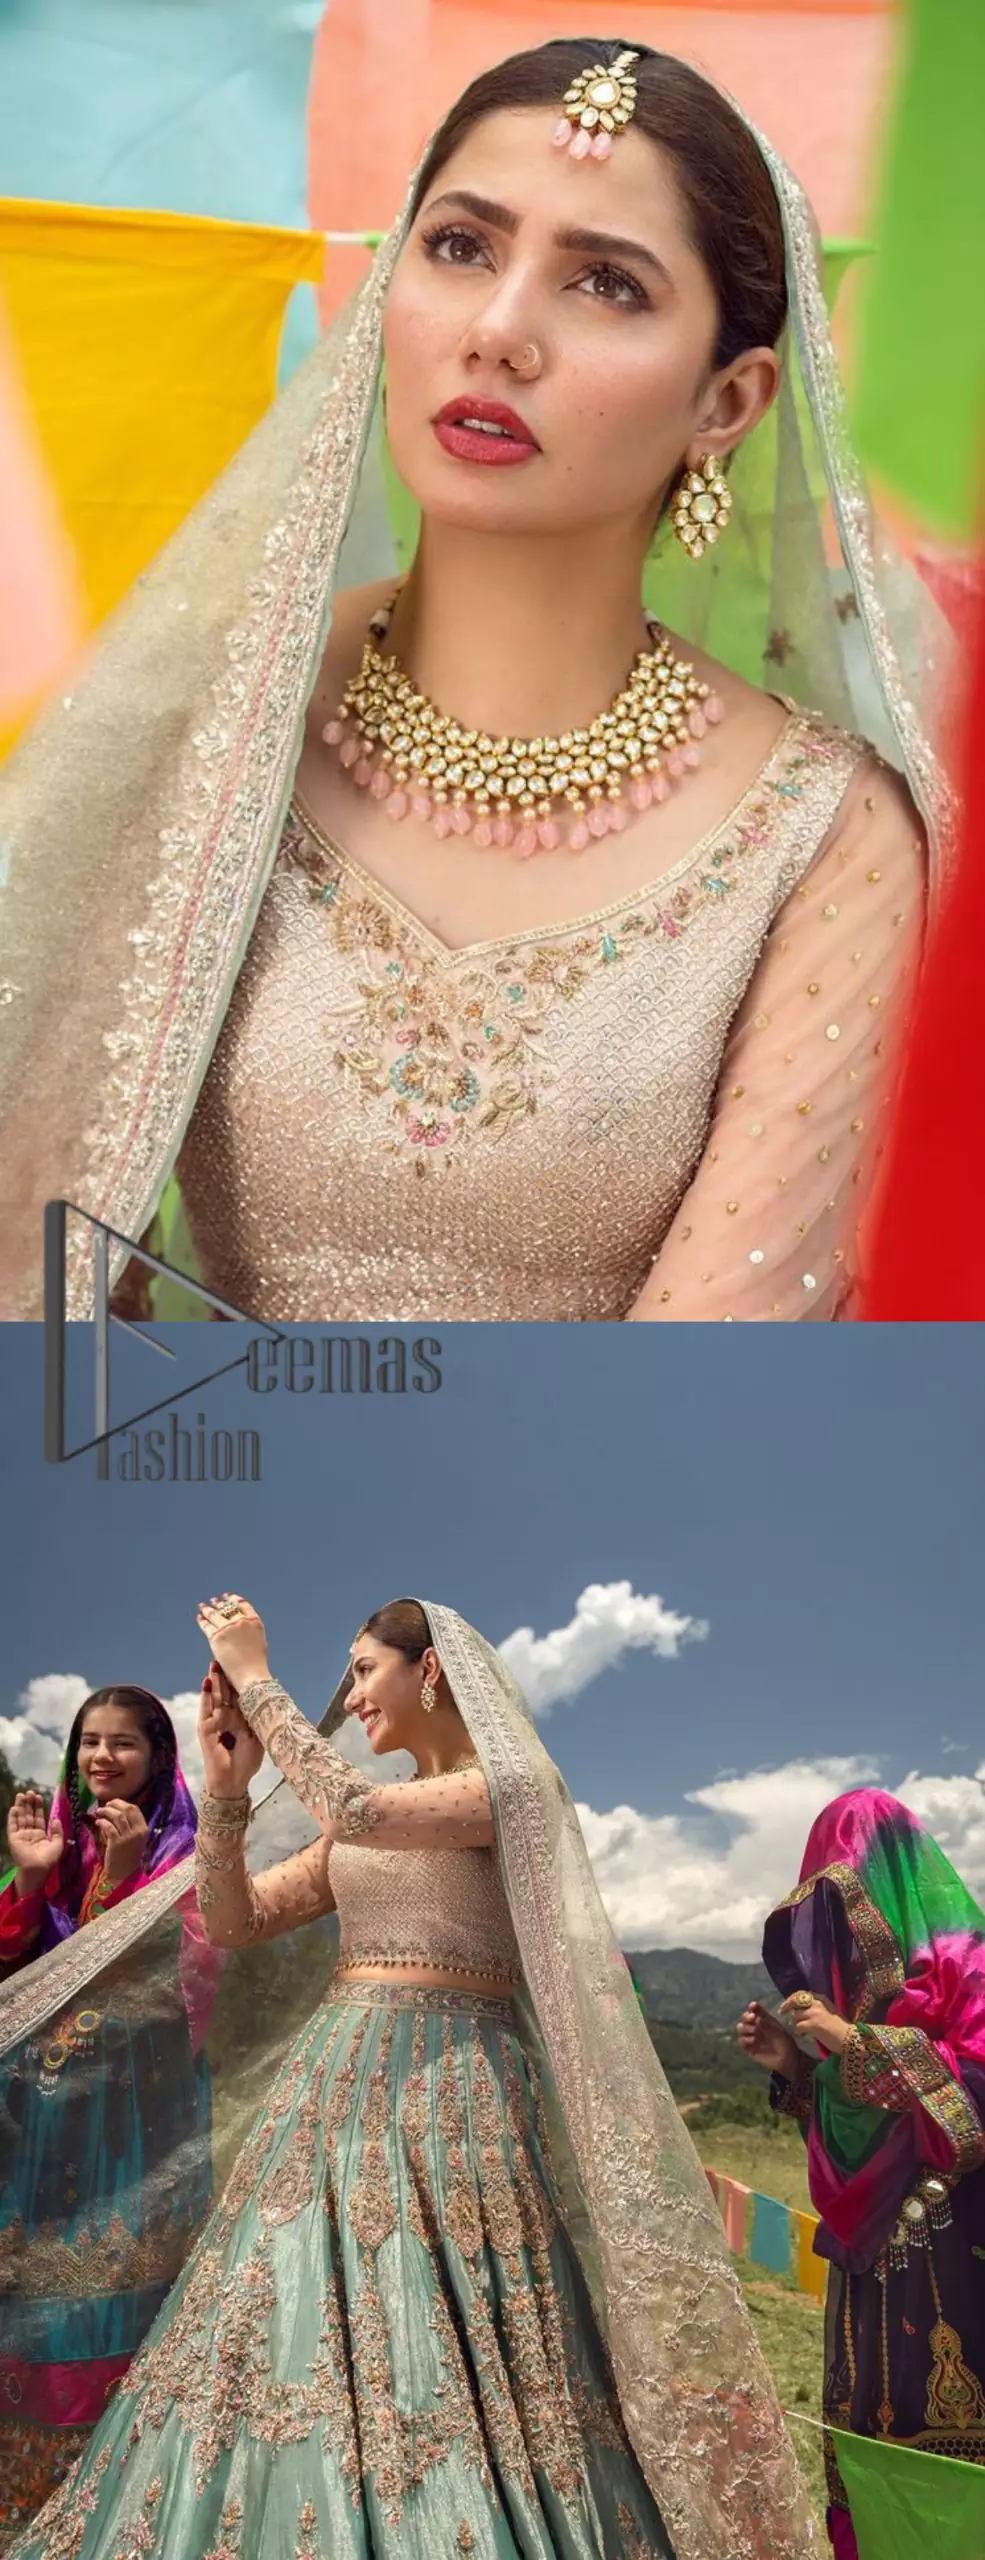 Talking about traditional, Deemas Fashion introduces the Aqua Lehenga and pink blouse which is an outstanding upgrade to bridal wear. This stunning full-sleeved attire presents an enchanting sweetheart neckline, embellished with the finest work of light golden embroidery, and adorned with pearls. This bridal wear has its own admiring look that comes with a tissue dupatta with embellished border. The Aqua colour of Lehenga gives so soothing look to the whole outfit. Furthermore, the lehenga is delicately adorned with golden kora, dabka, tilla, sequins and pearls embroidery. The border of the lehenga is also ornamented with embellished applique which gives the perfect ending to this outfit.